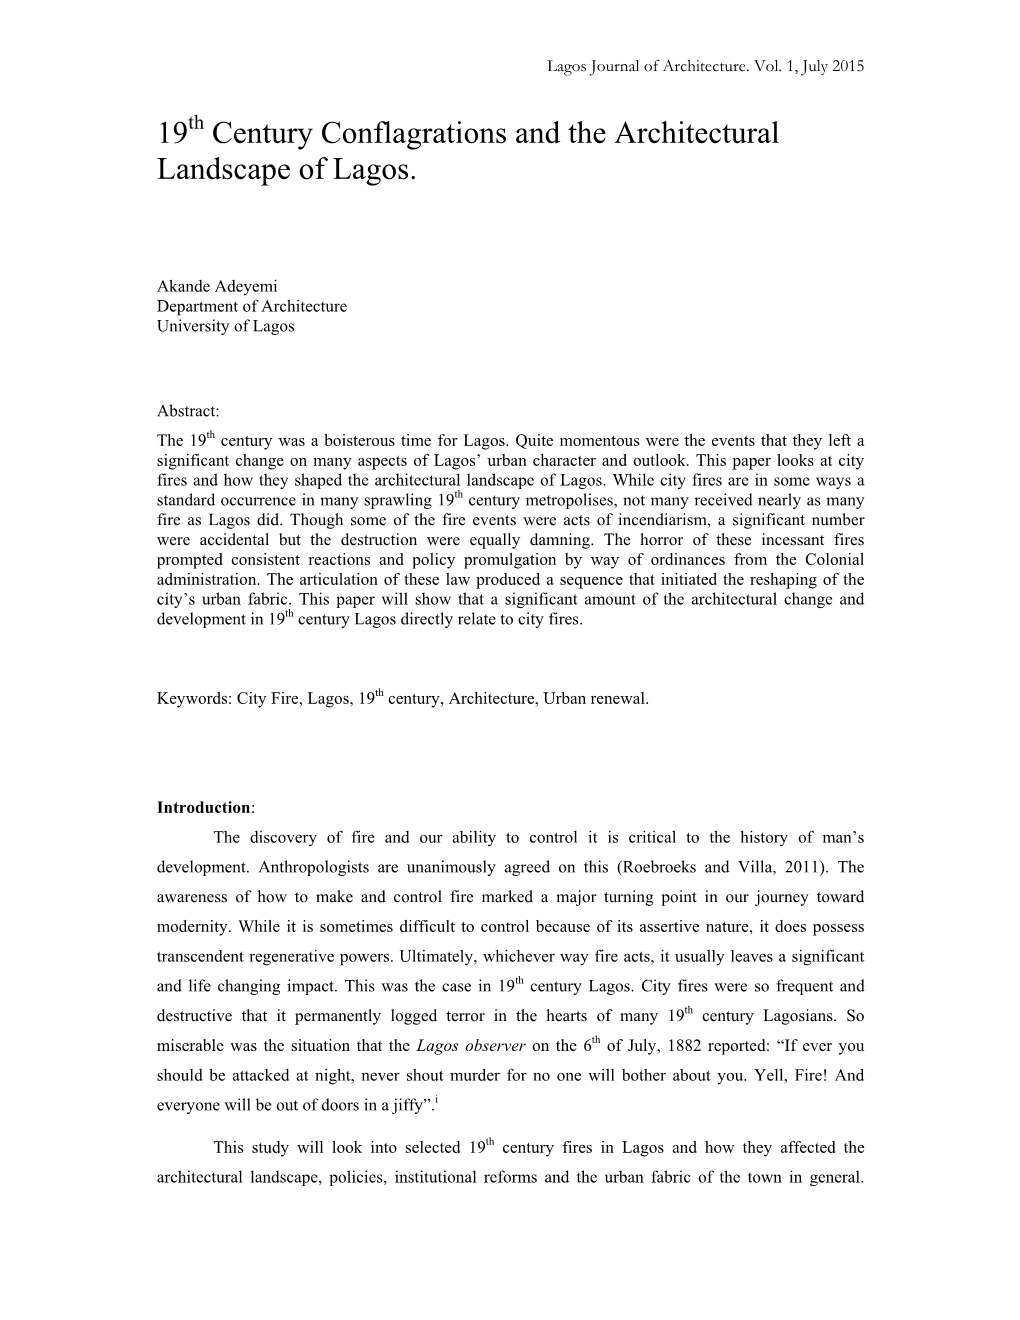 19Th Century Conflagrations and the Architectural Landscape of Lagos